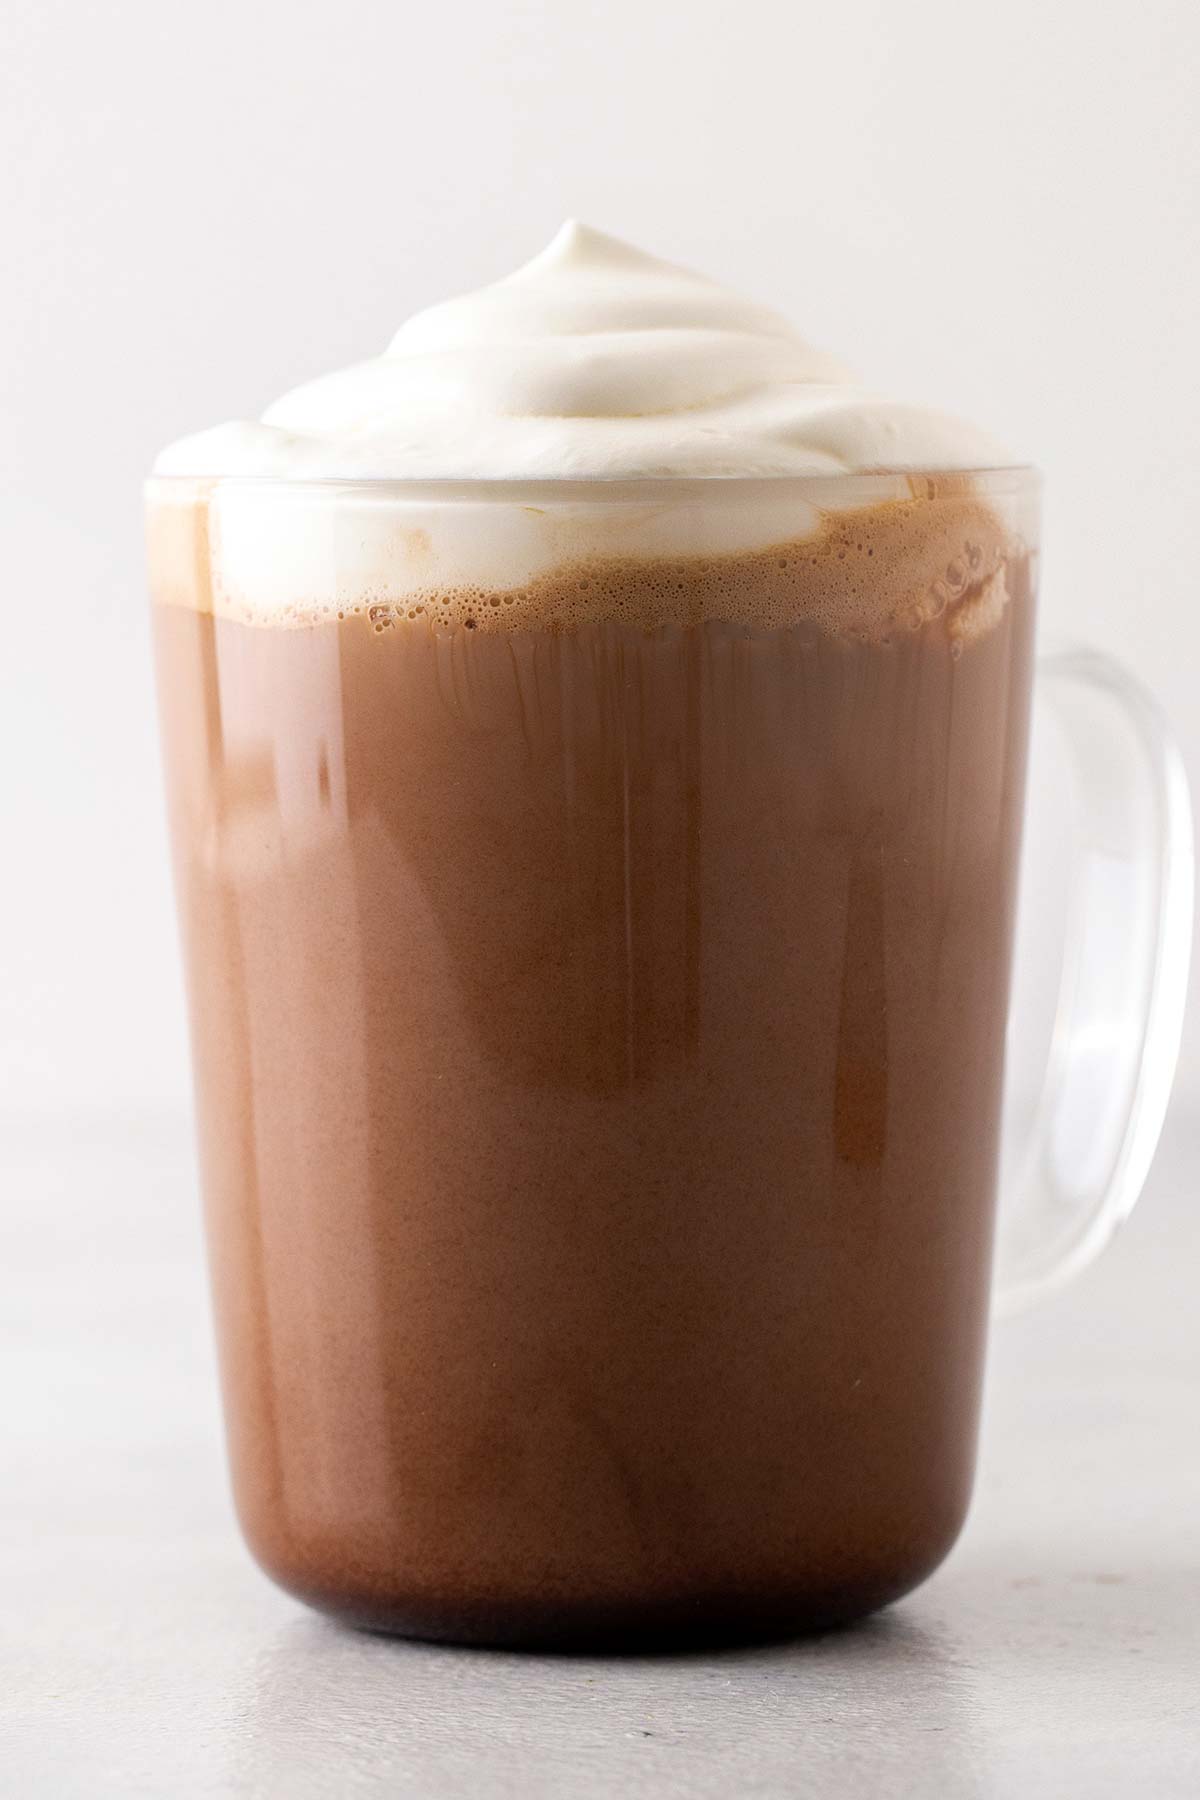 Starbucks Mocha copycat recipe latte in a clear mug, topped with whipped cream.
